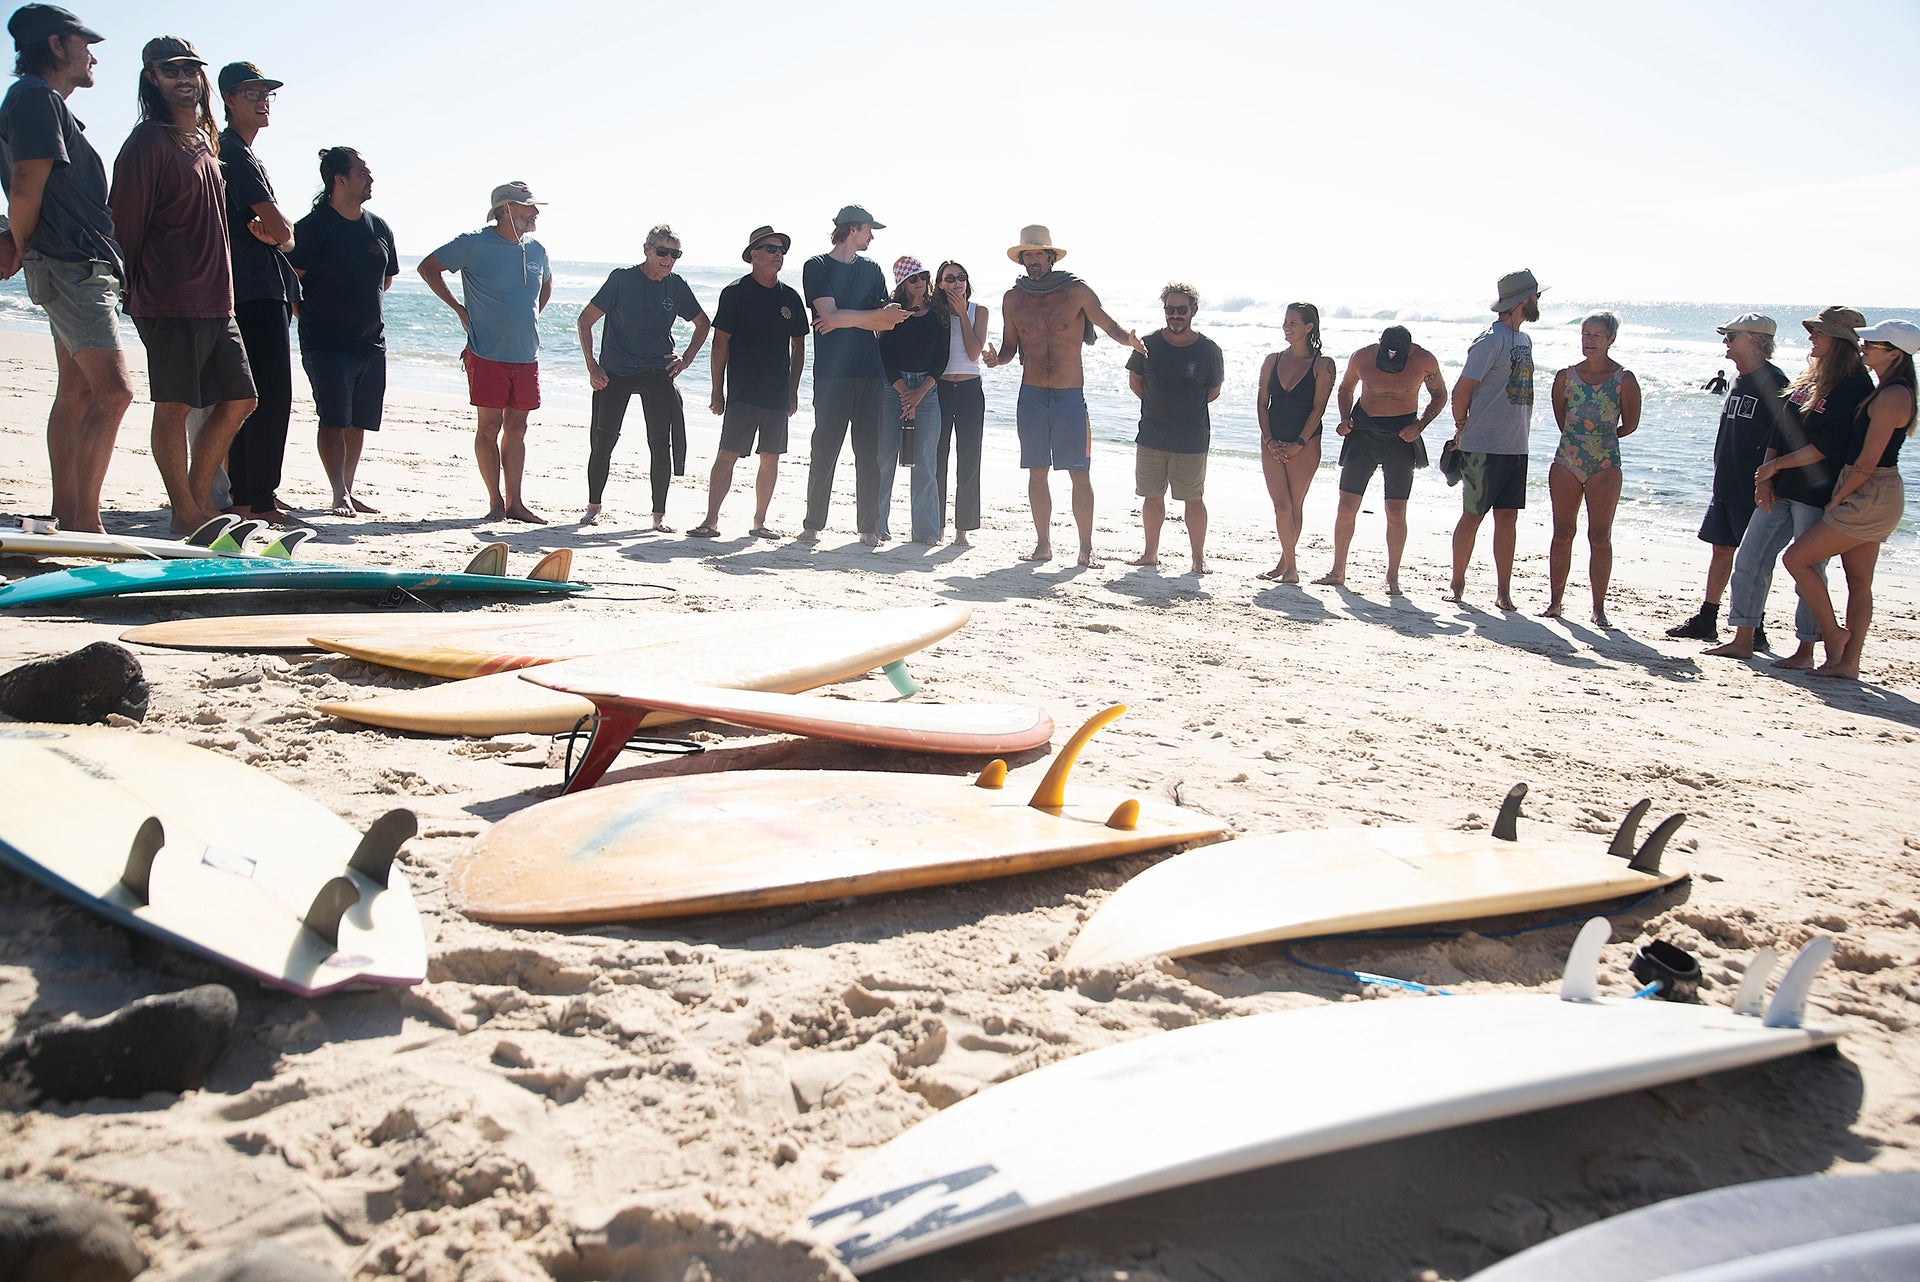 “With over 30 people, and as many surfboards on the sand, we dove deep into experiencing surfing’s diversity,” said Dave Rastovich. Photo Justin Crawford